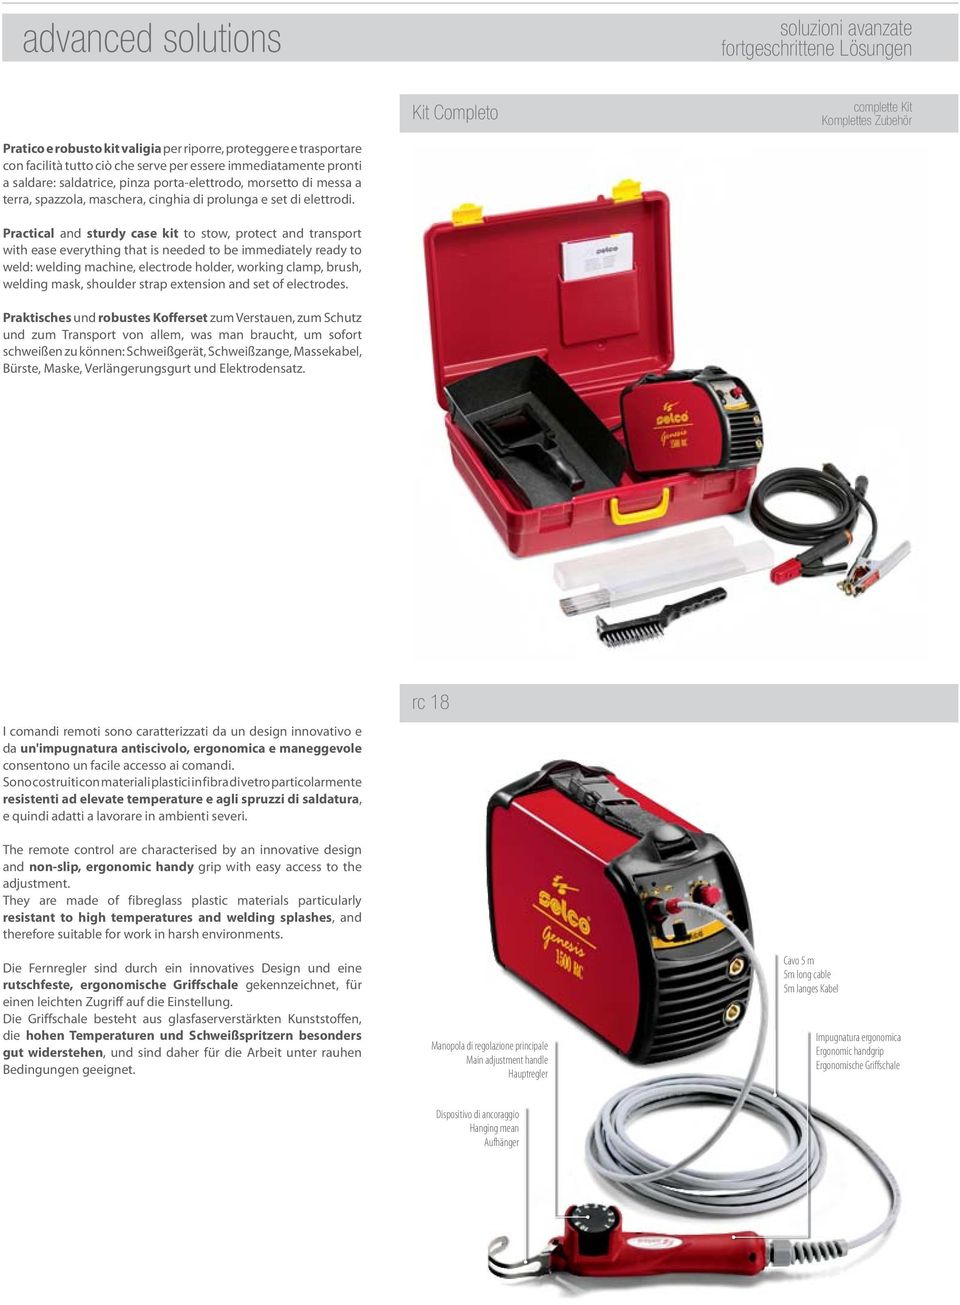 Practical and sturdy case kit to stow, protect and transport with ease everything that is needed to be immediately ready to weld: welding machine, electrode holder, working clamp, brush, welding